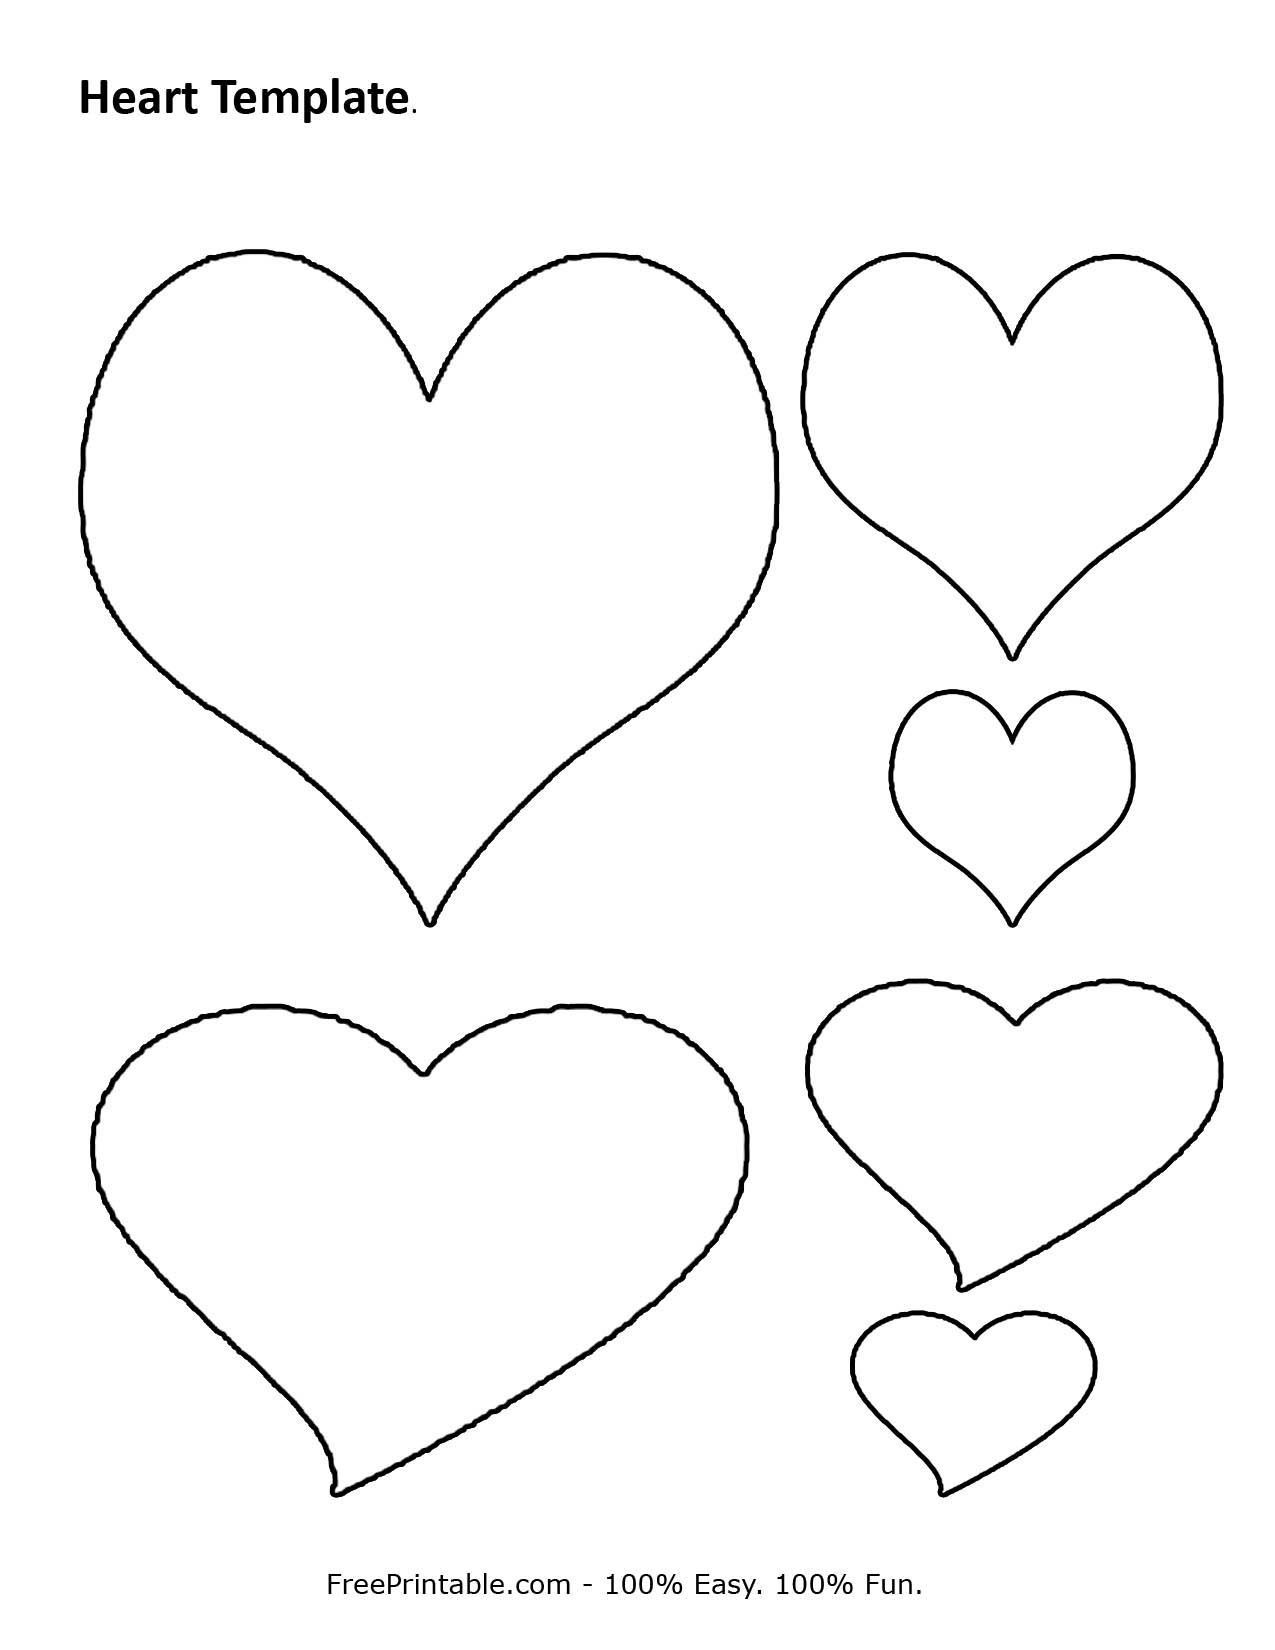 Free Printable Heart Template | Cupid Has A Heart On | Pinterest - Free Printable Heart Templates